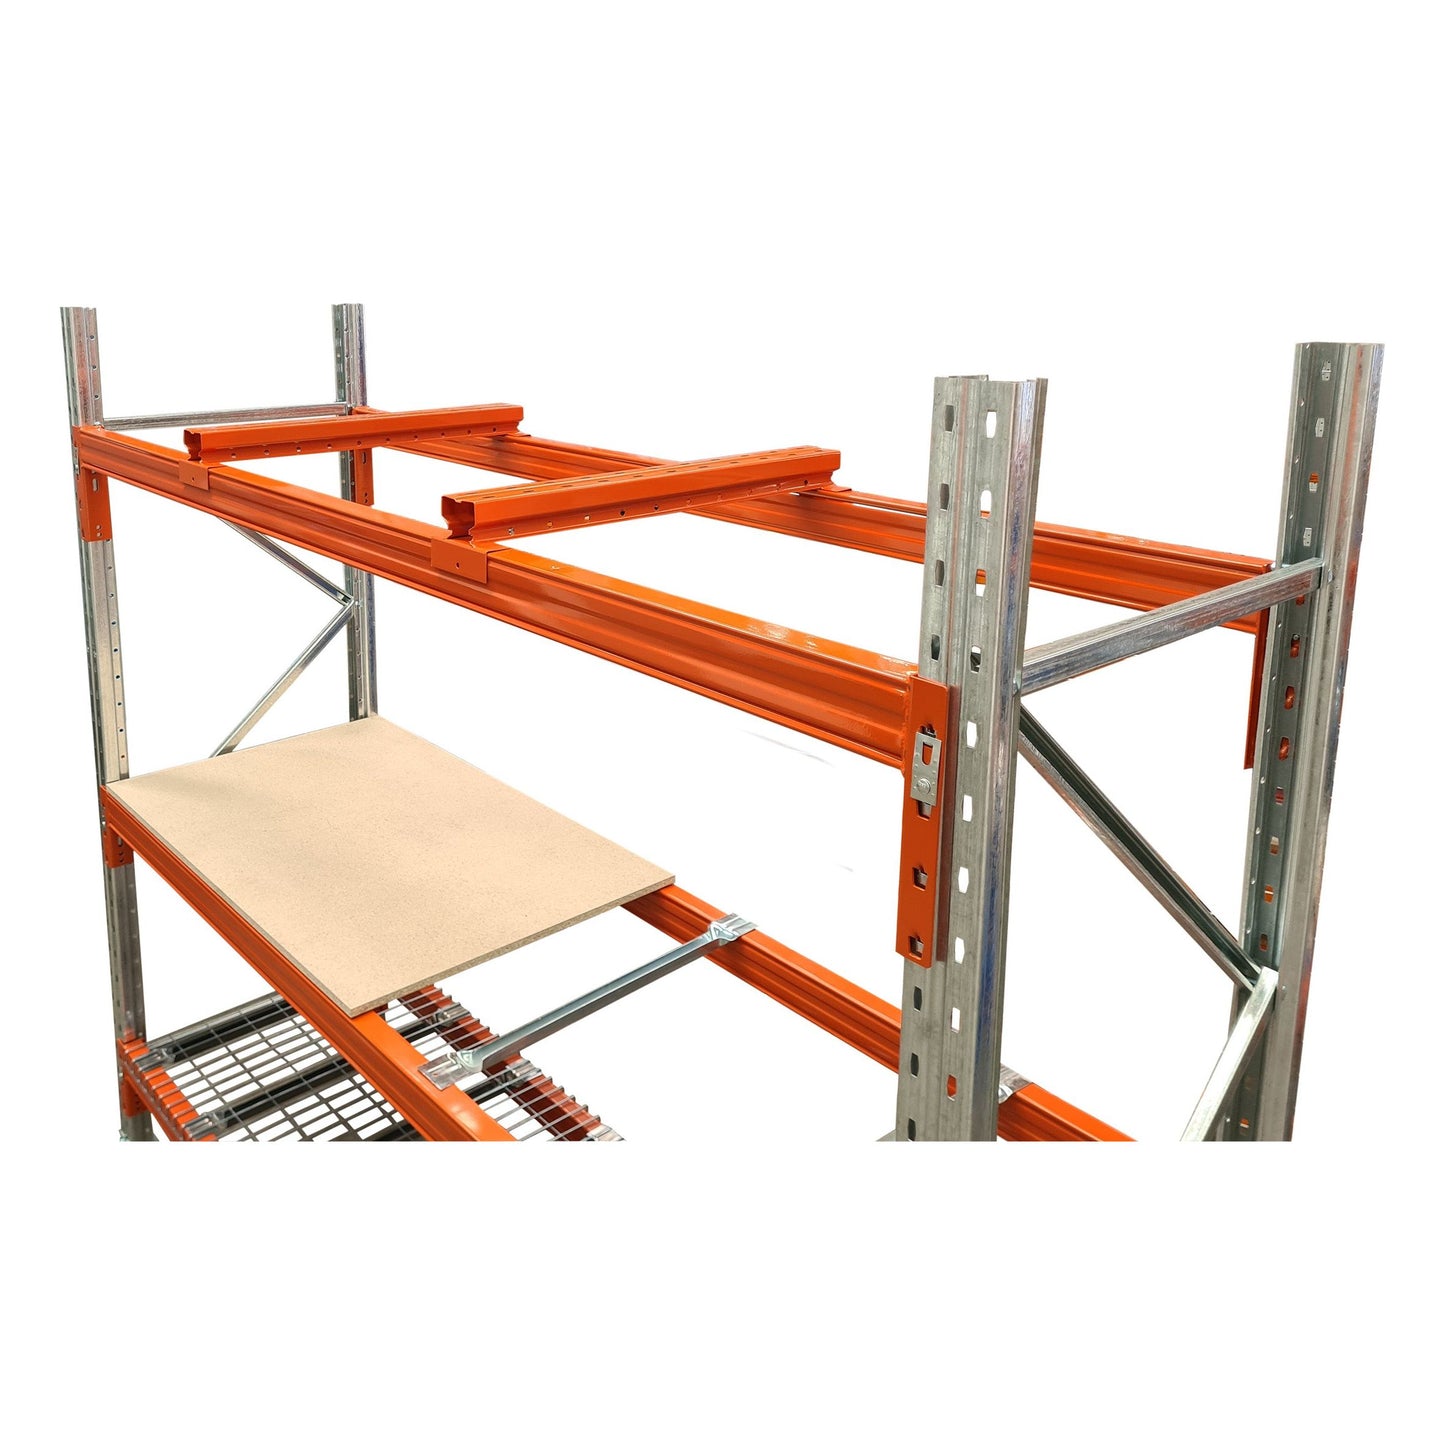 ReadyRack Chipboard 1350x835x18 to suit 1372mm Beam length